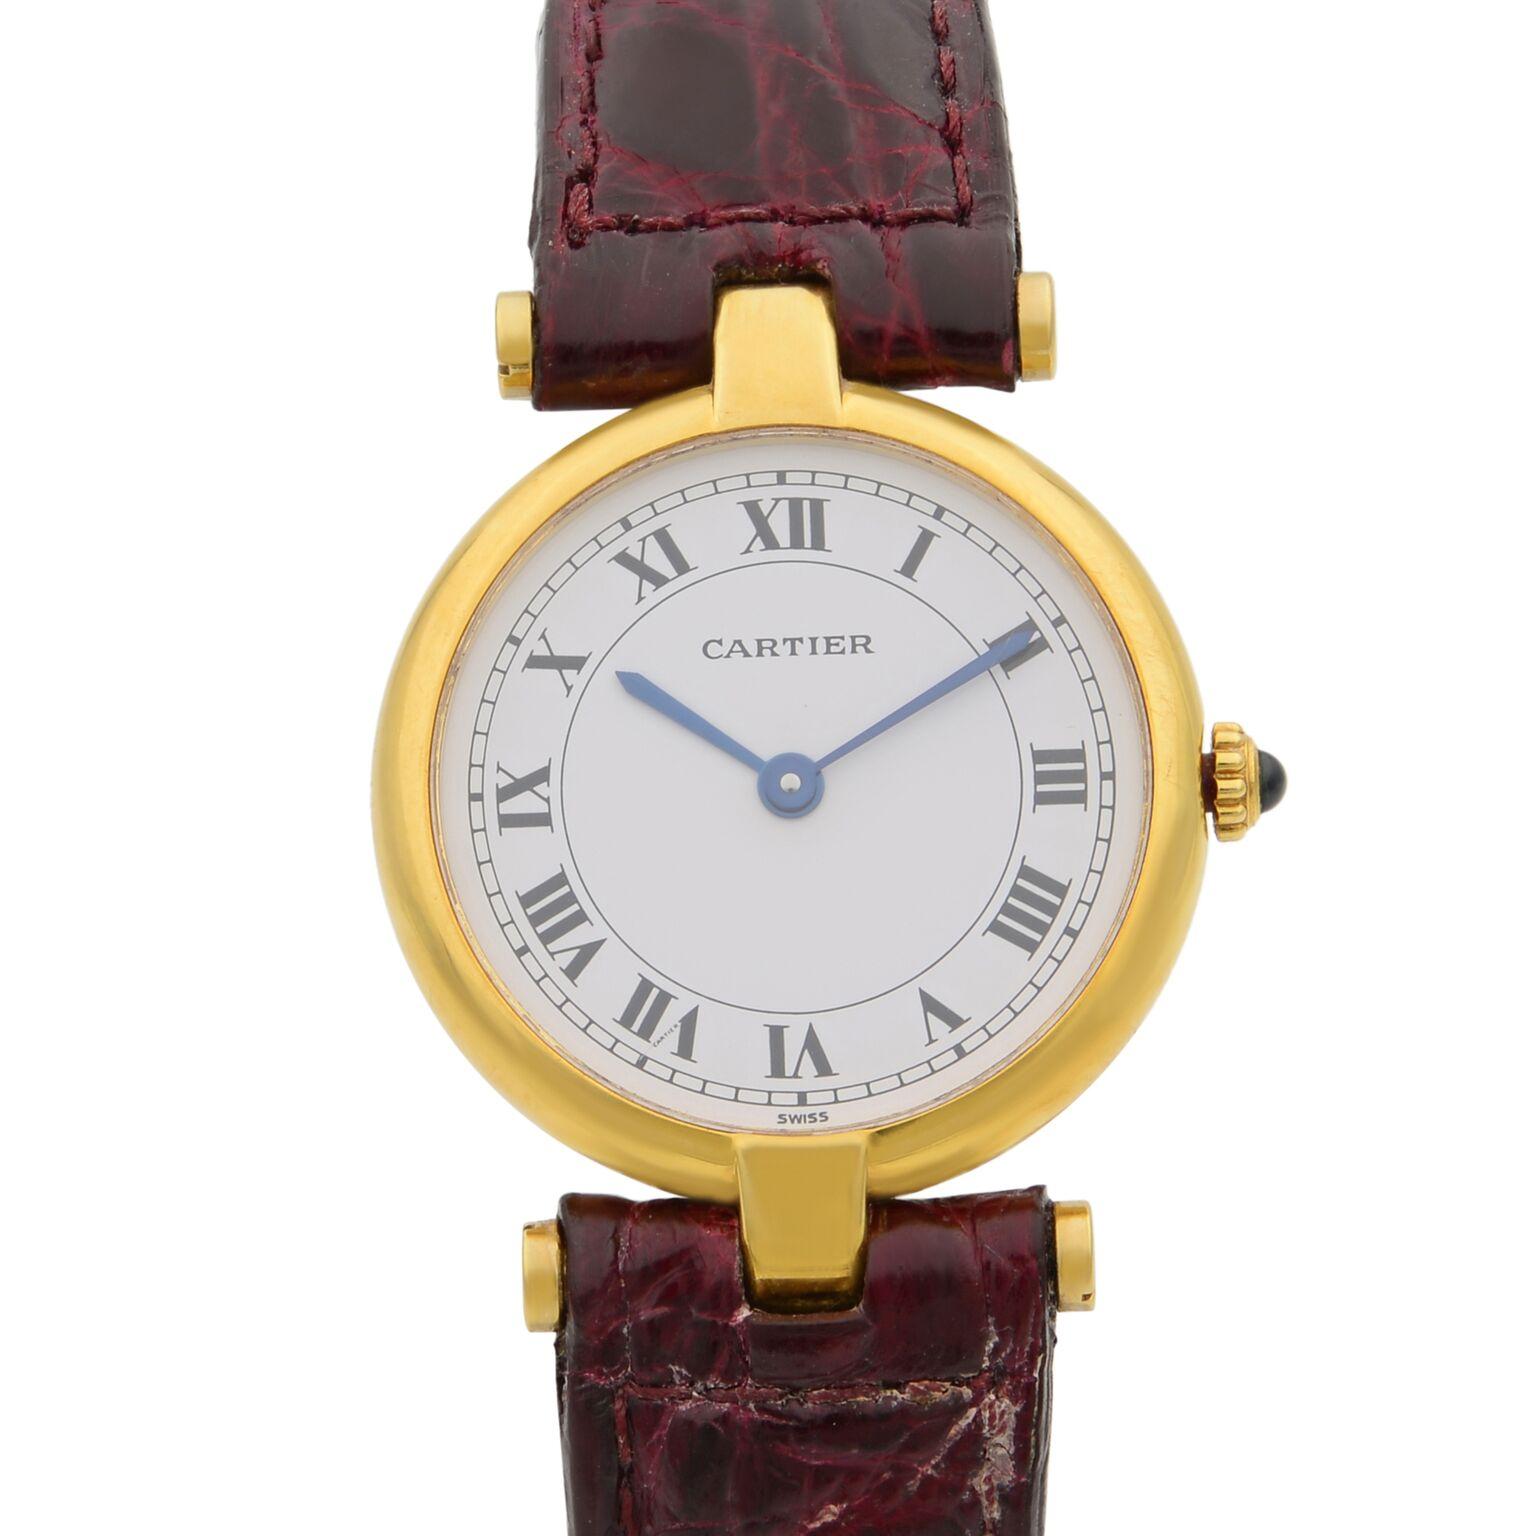 This pre-owned Cartier Vendome 8100 is a beautiful Ladie's timepiece that is powered by quartz (battery) movement which is cased in a yellow gold case. It has a round shape face, no features dial, and has hand roman numerals style markers. It is